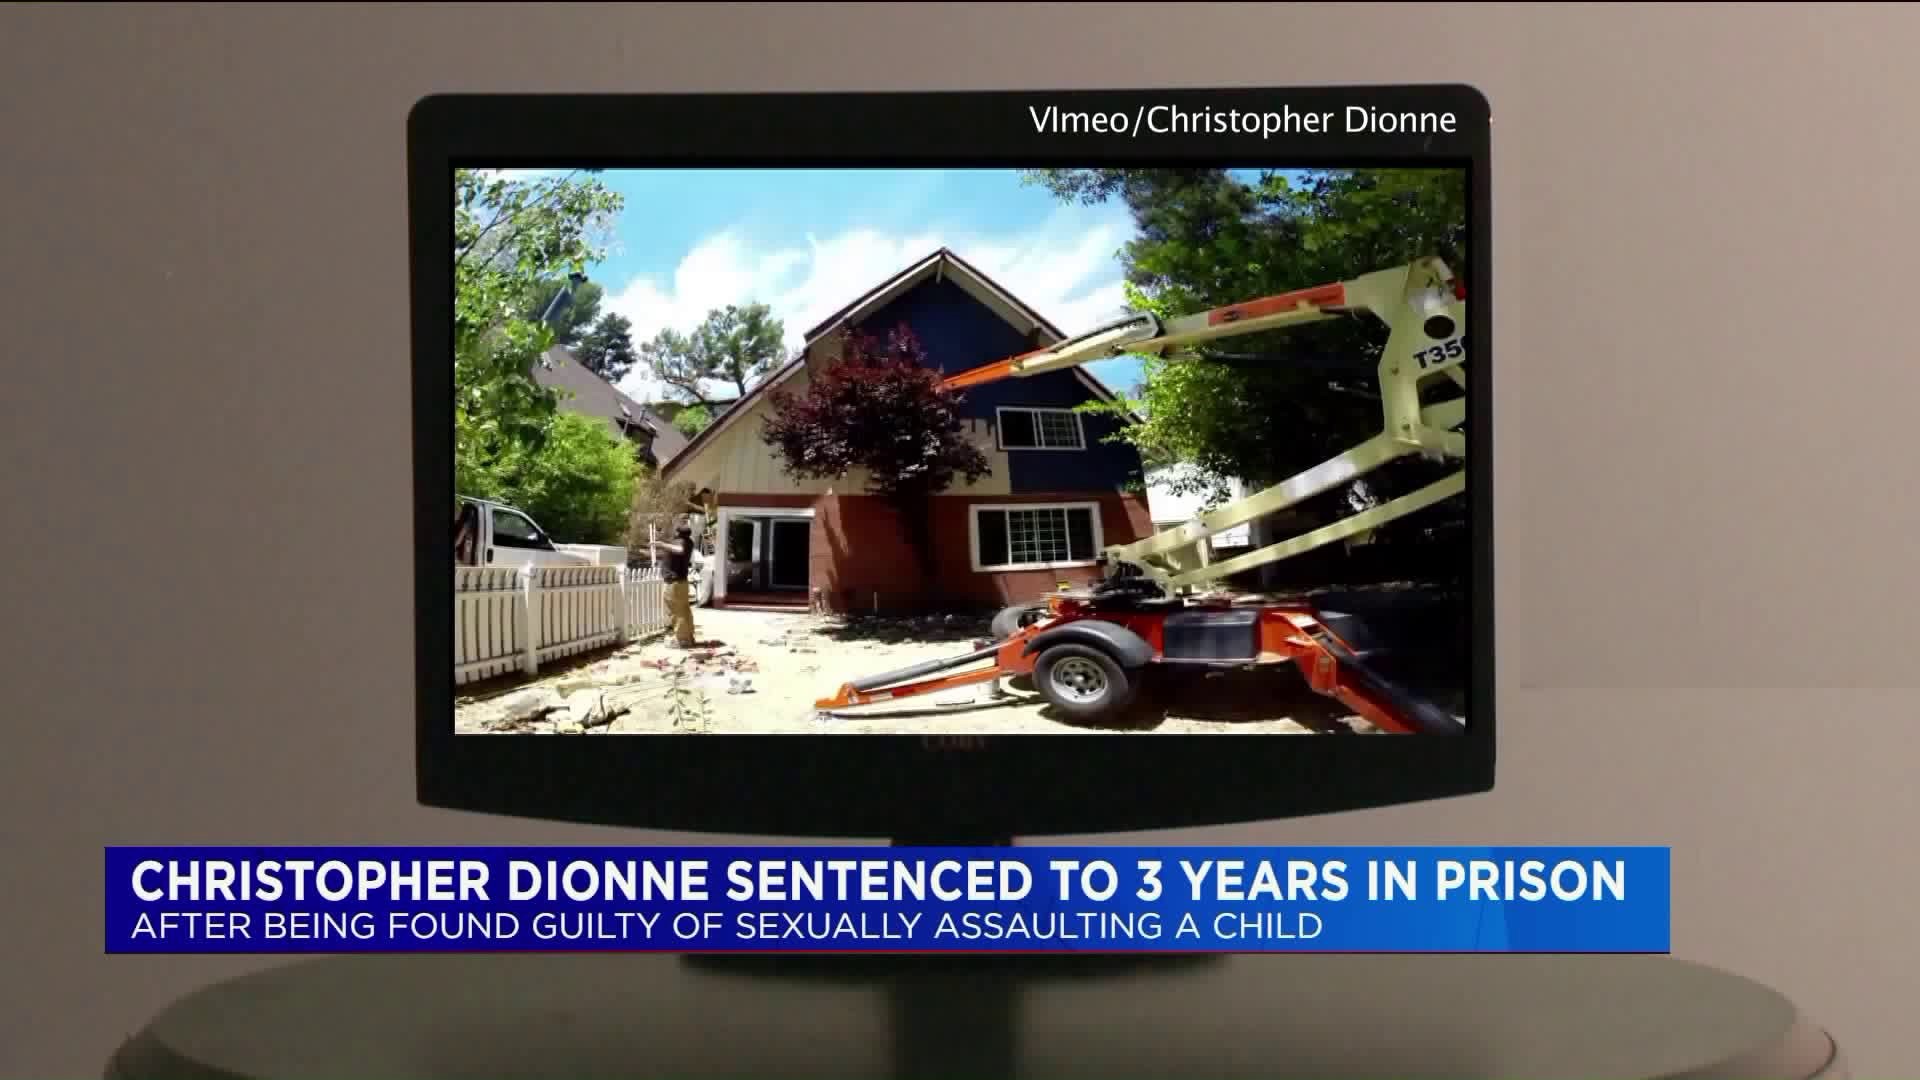 Chris Dionne sentence to 3 years in prison